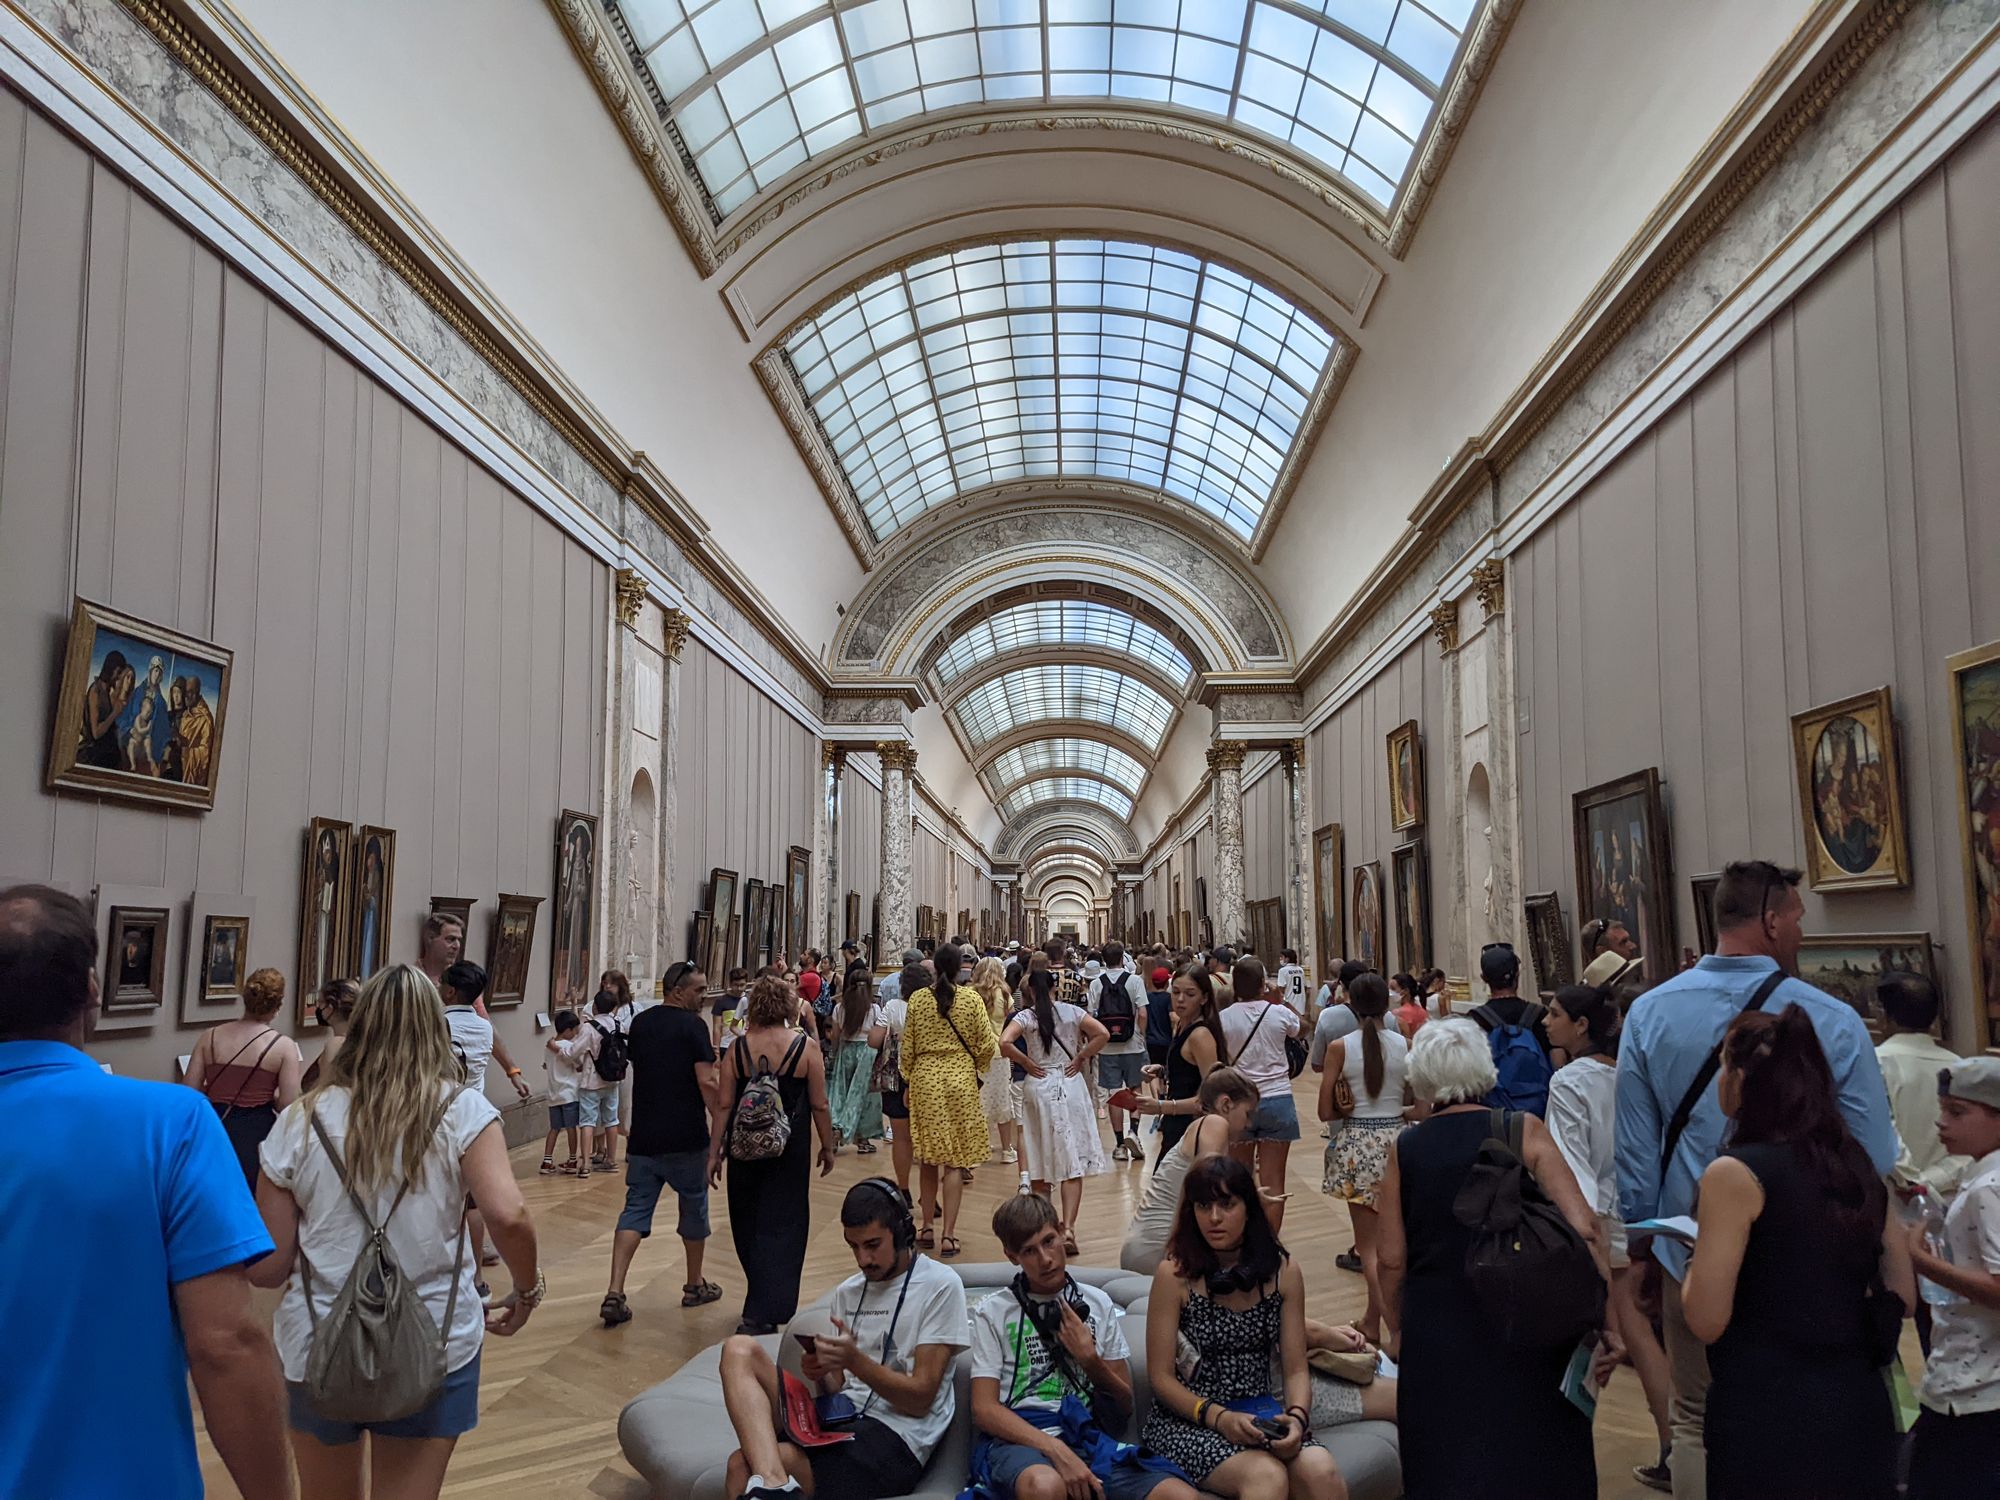 Crowds of people in a corridor of the Louvre Museum in Paris